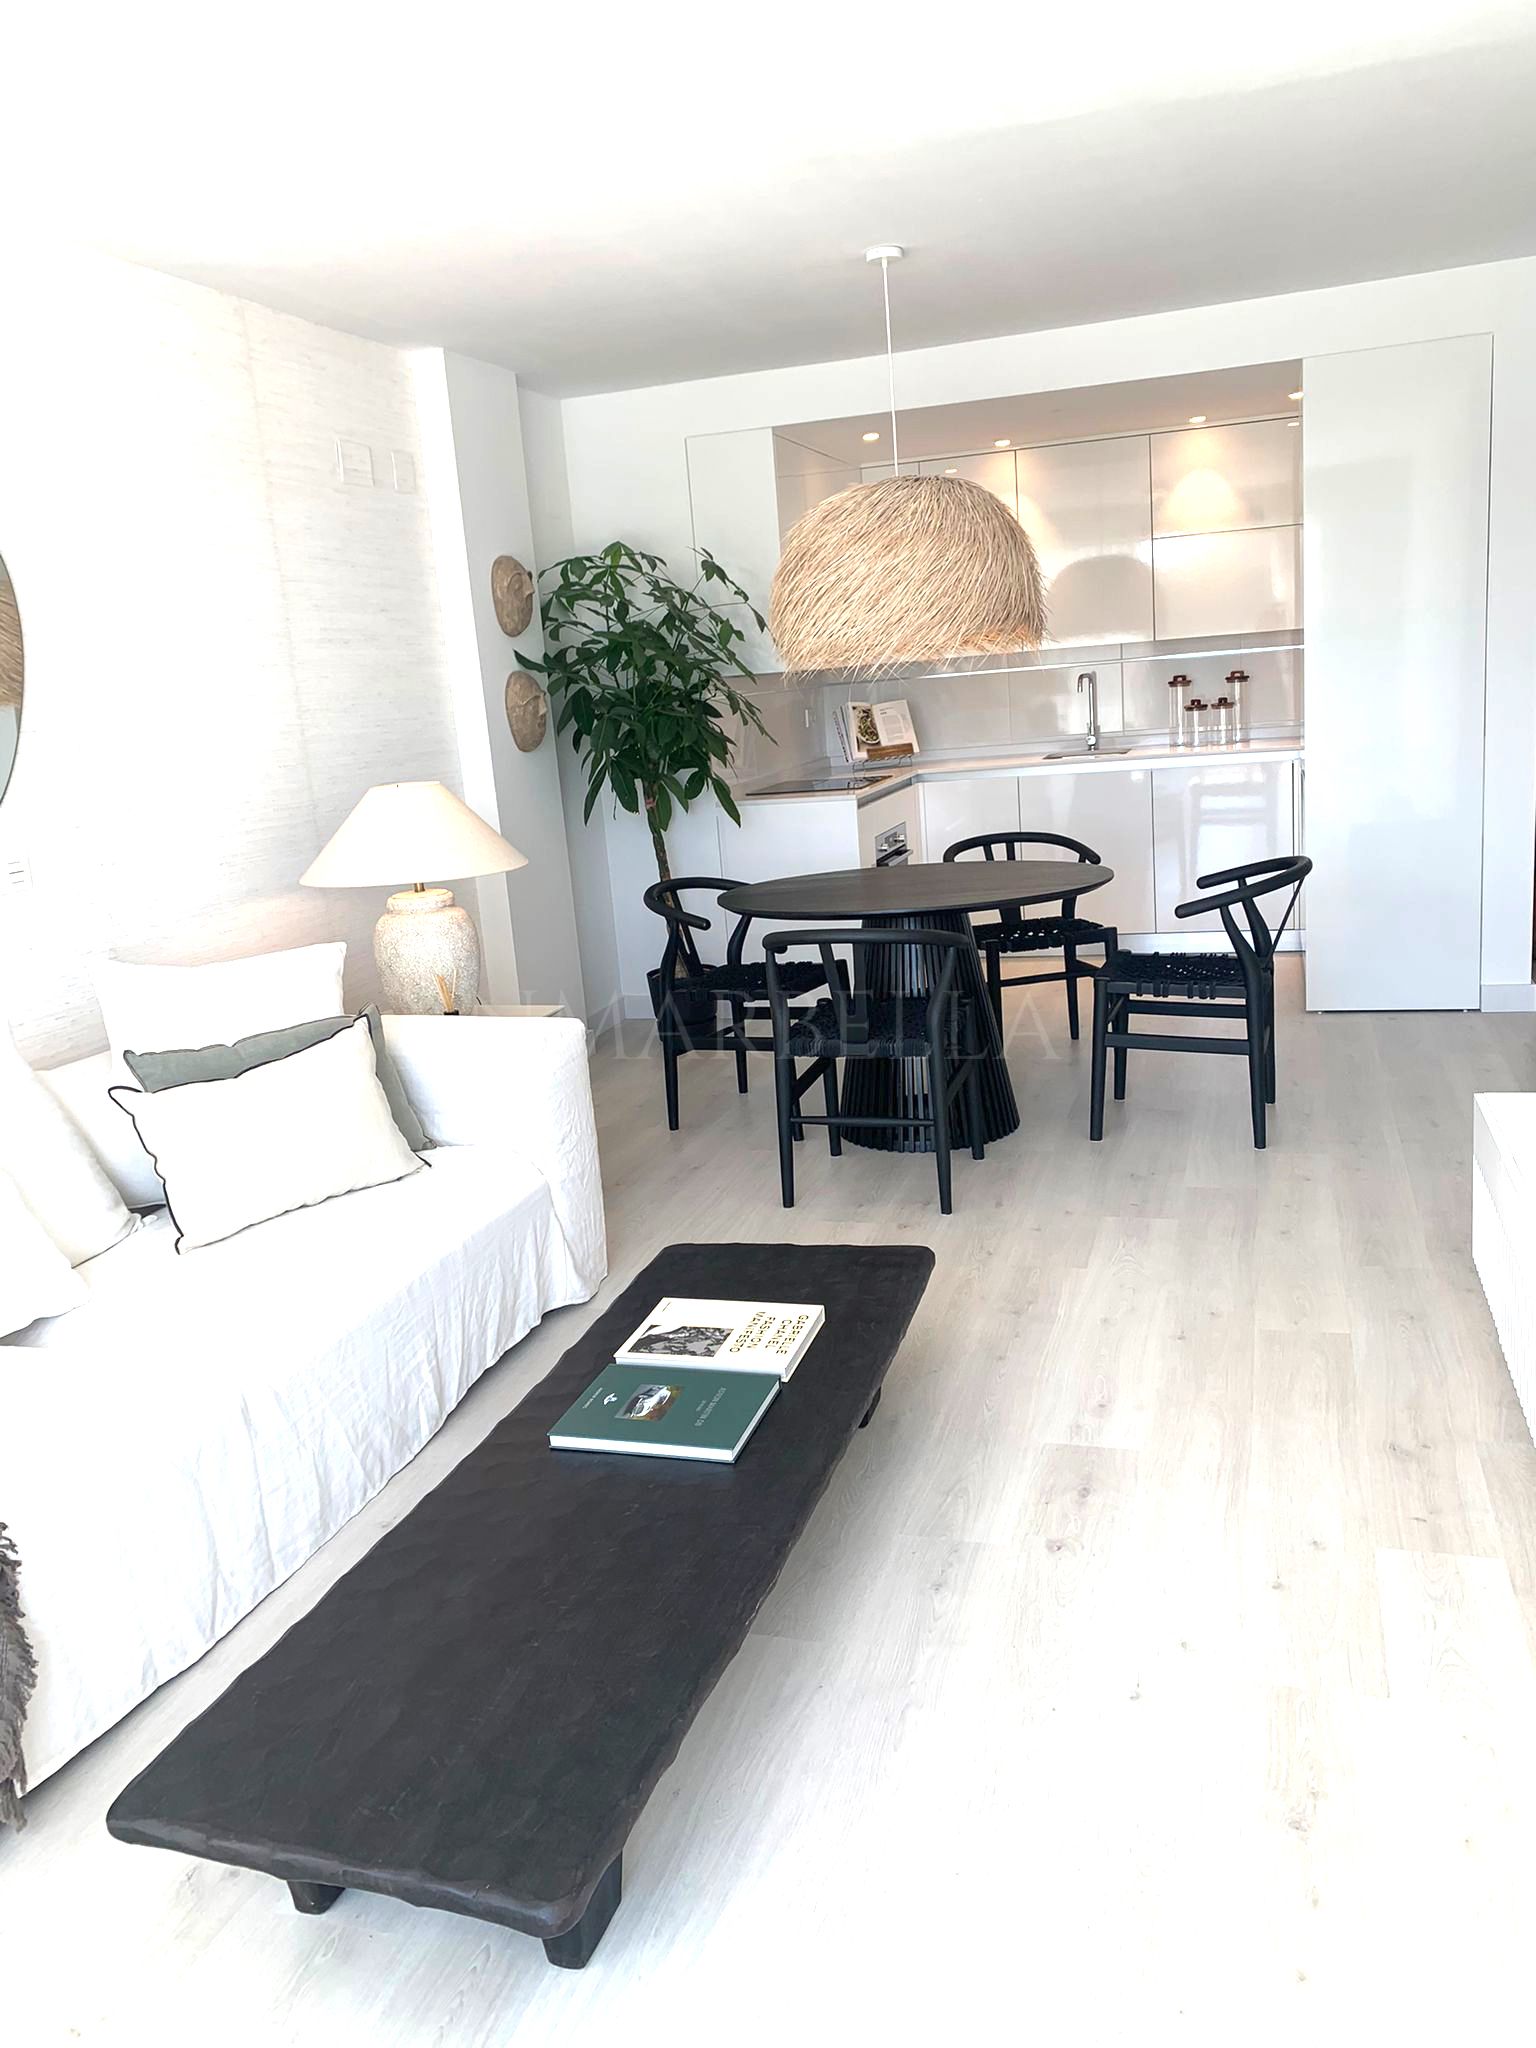 New apartment for sale in Fuengirola